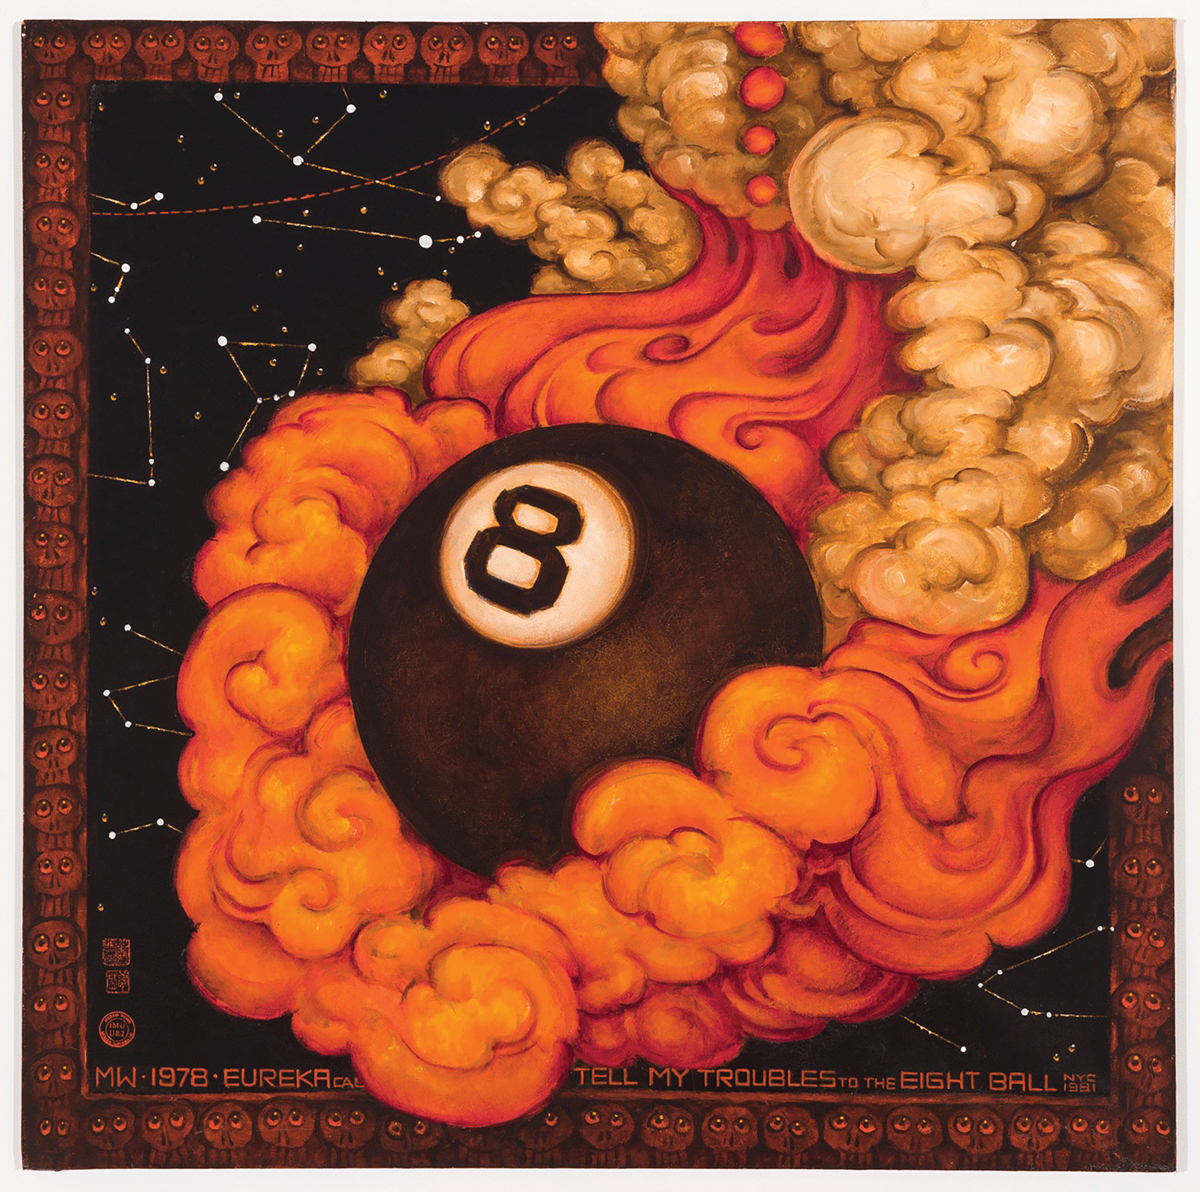 A painting of an 8-ball from pool with flames and smoke suggesting it is traveling at high speed.